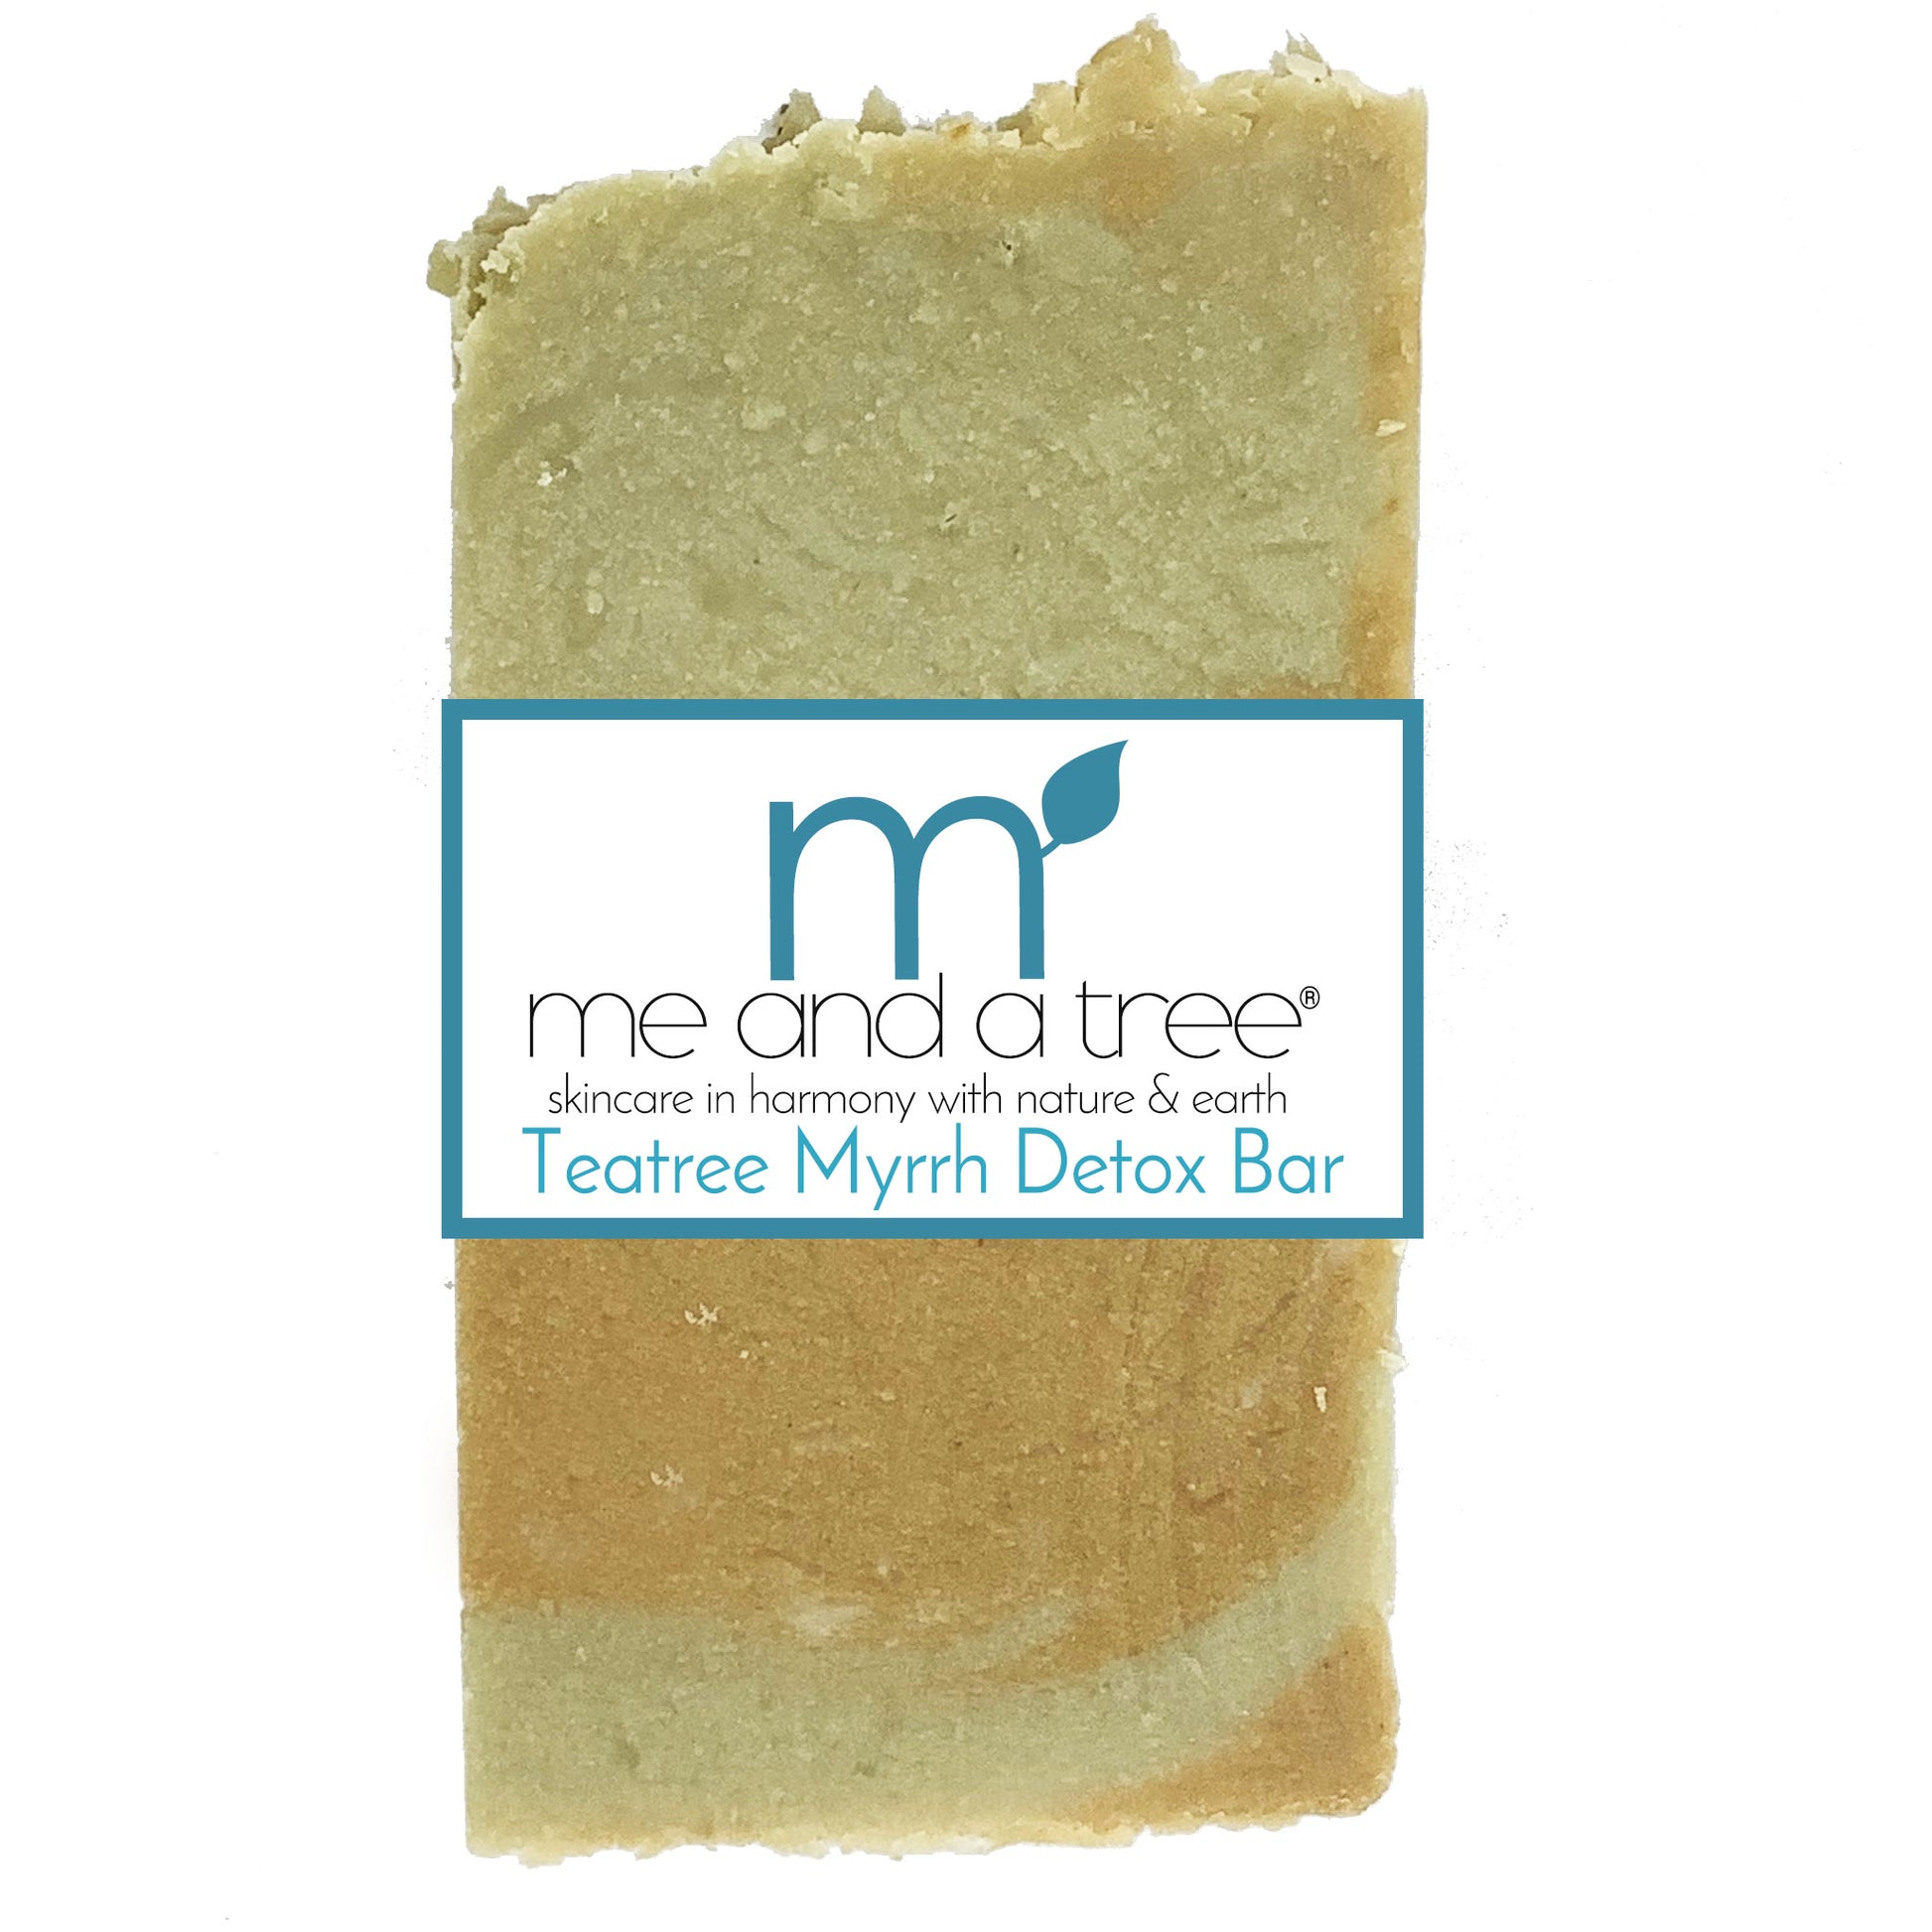 Tea Tree Myrrh Natural Antiseptic Detox Soap bar with essential oils and clay blend for facial, body, and hair care